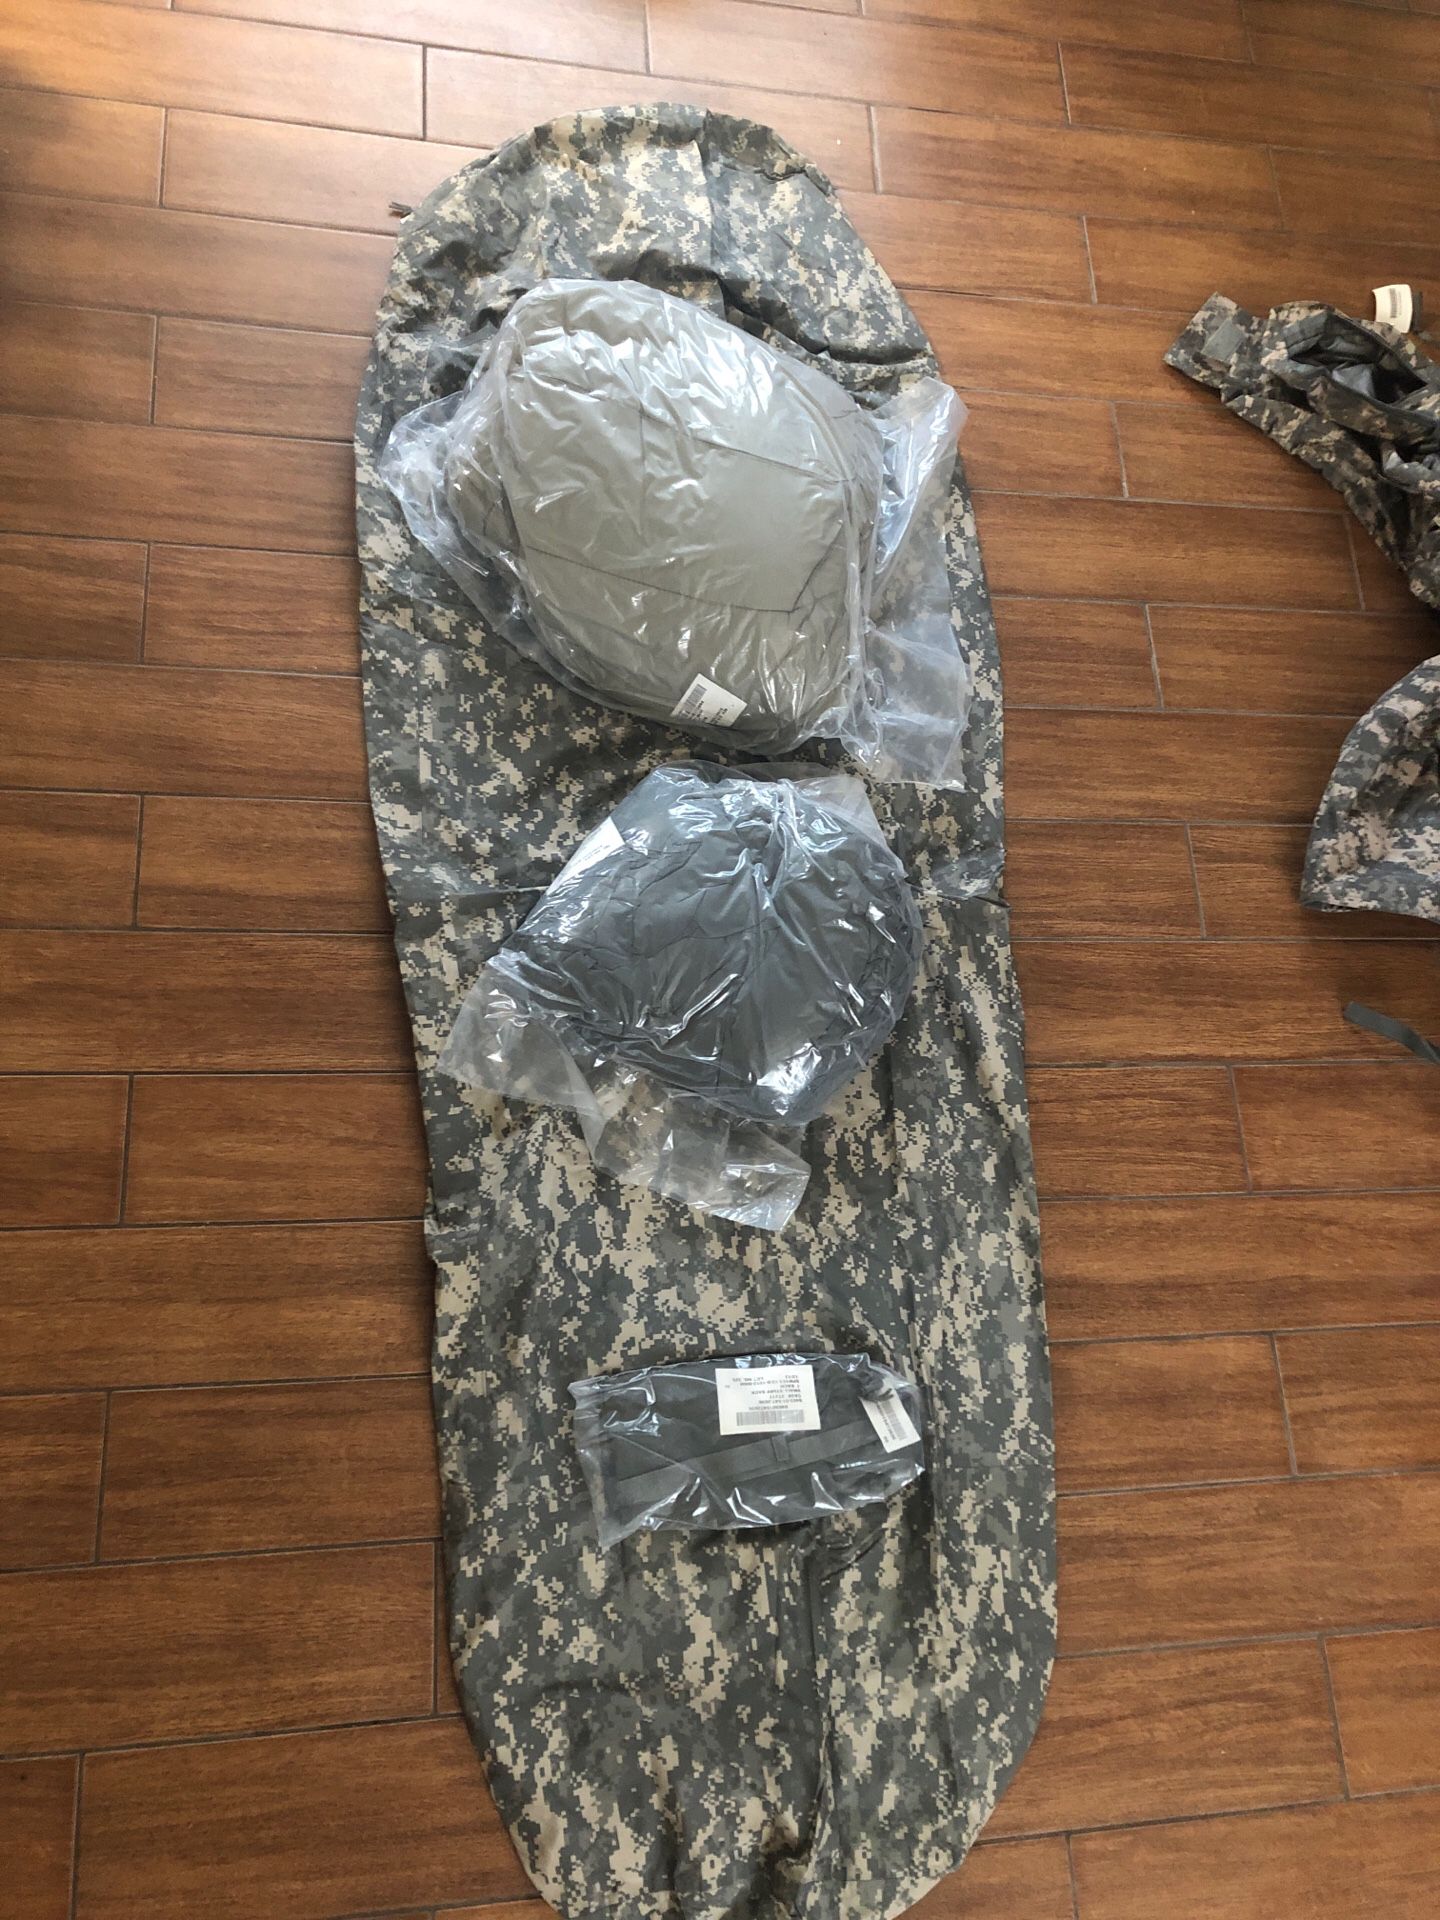 US Army official 4 piece Sleeping bag set